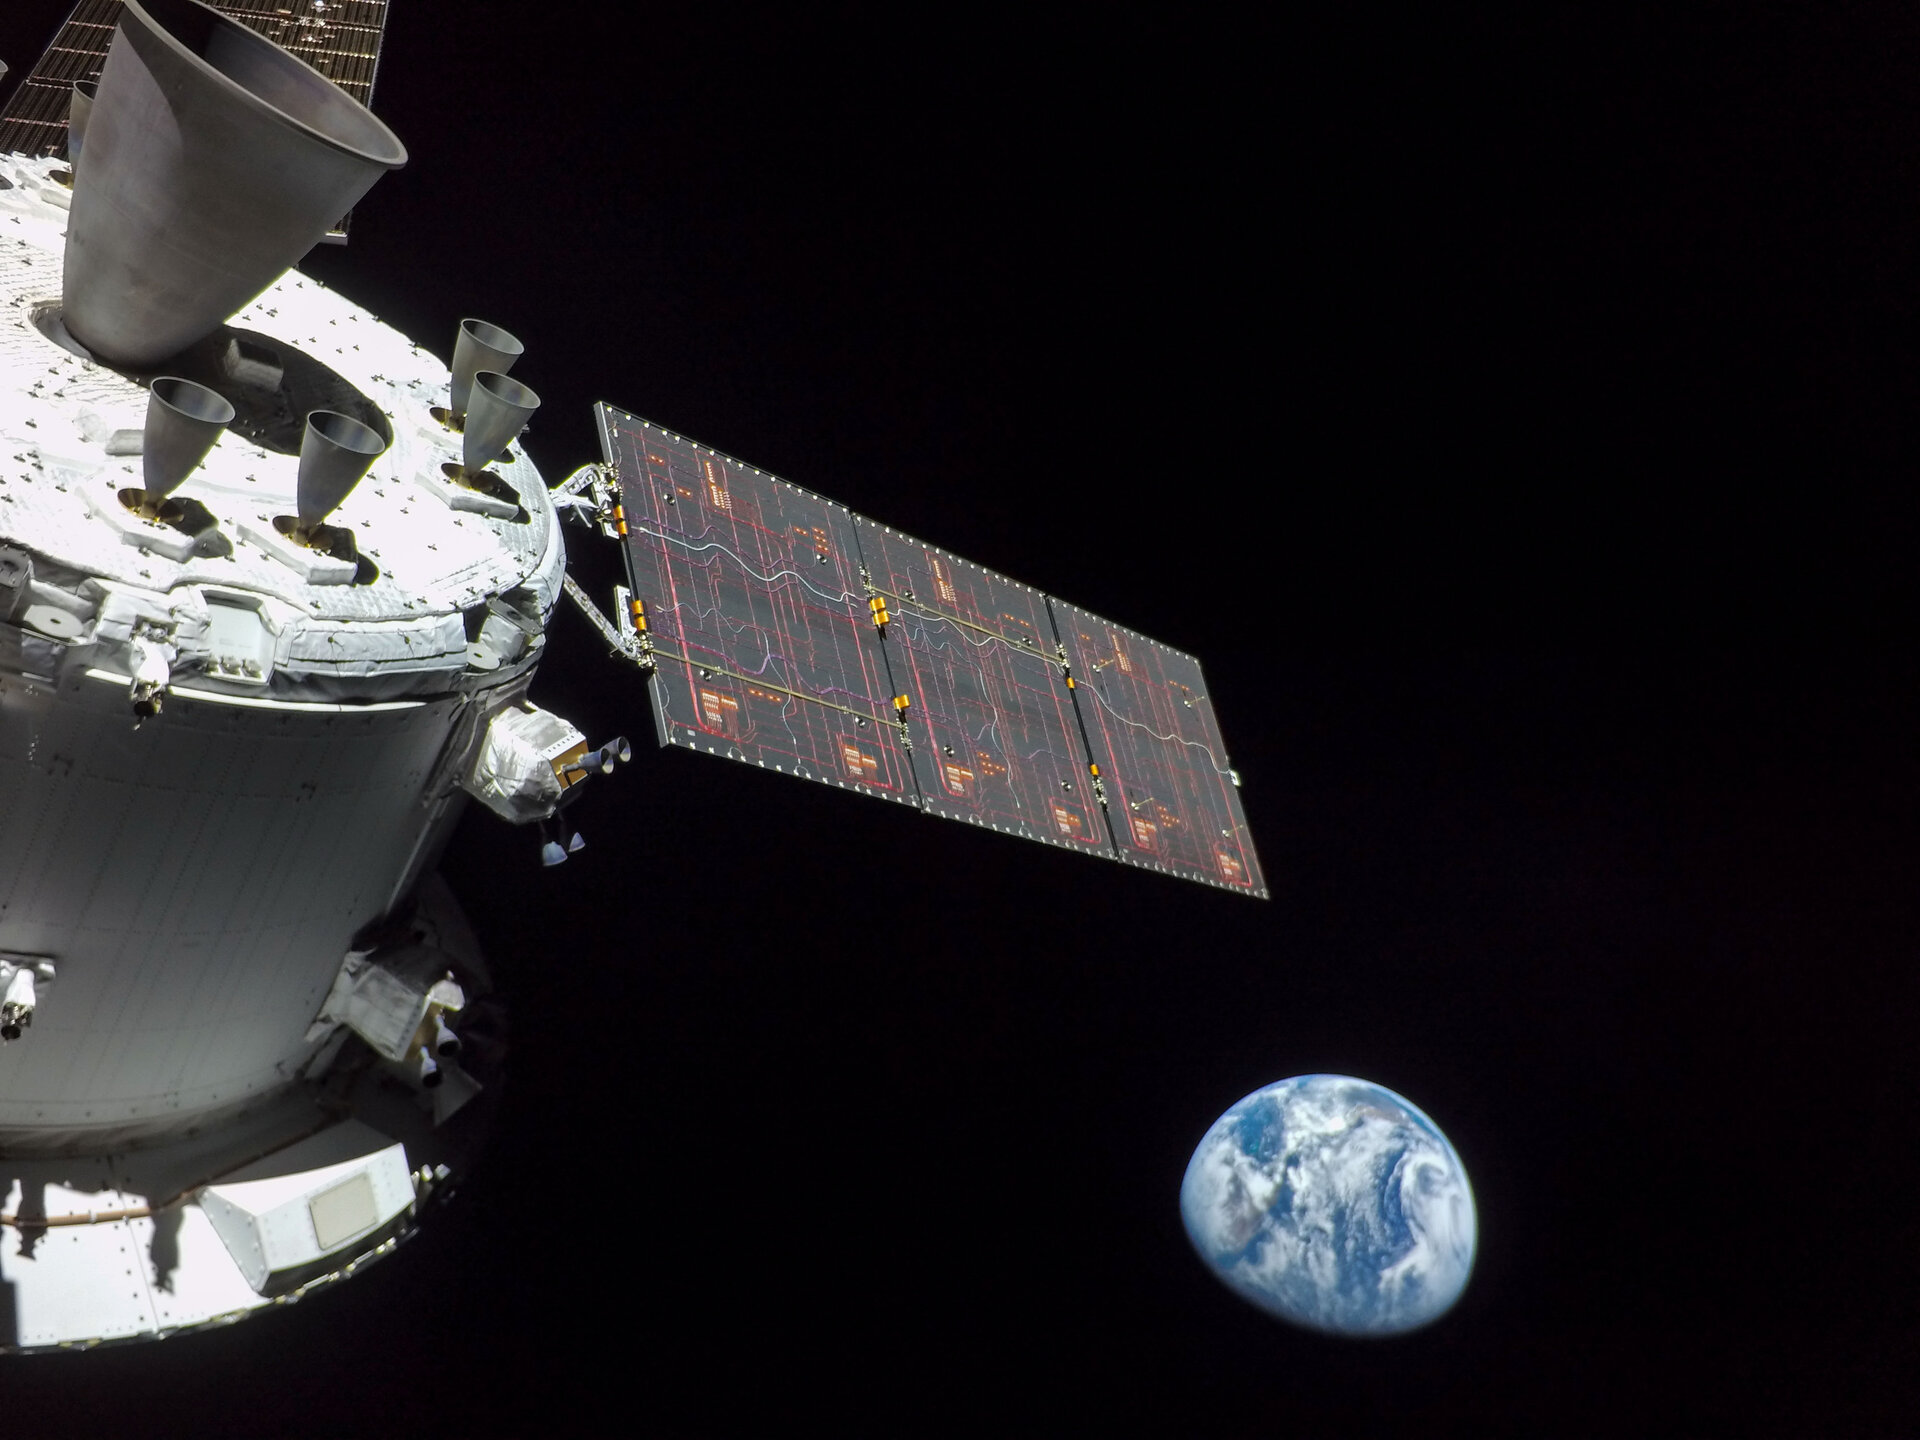 Space view of ESA's European Service Module powering NASA's Orion spacecraft to the Moon.